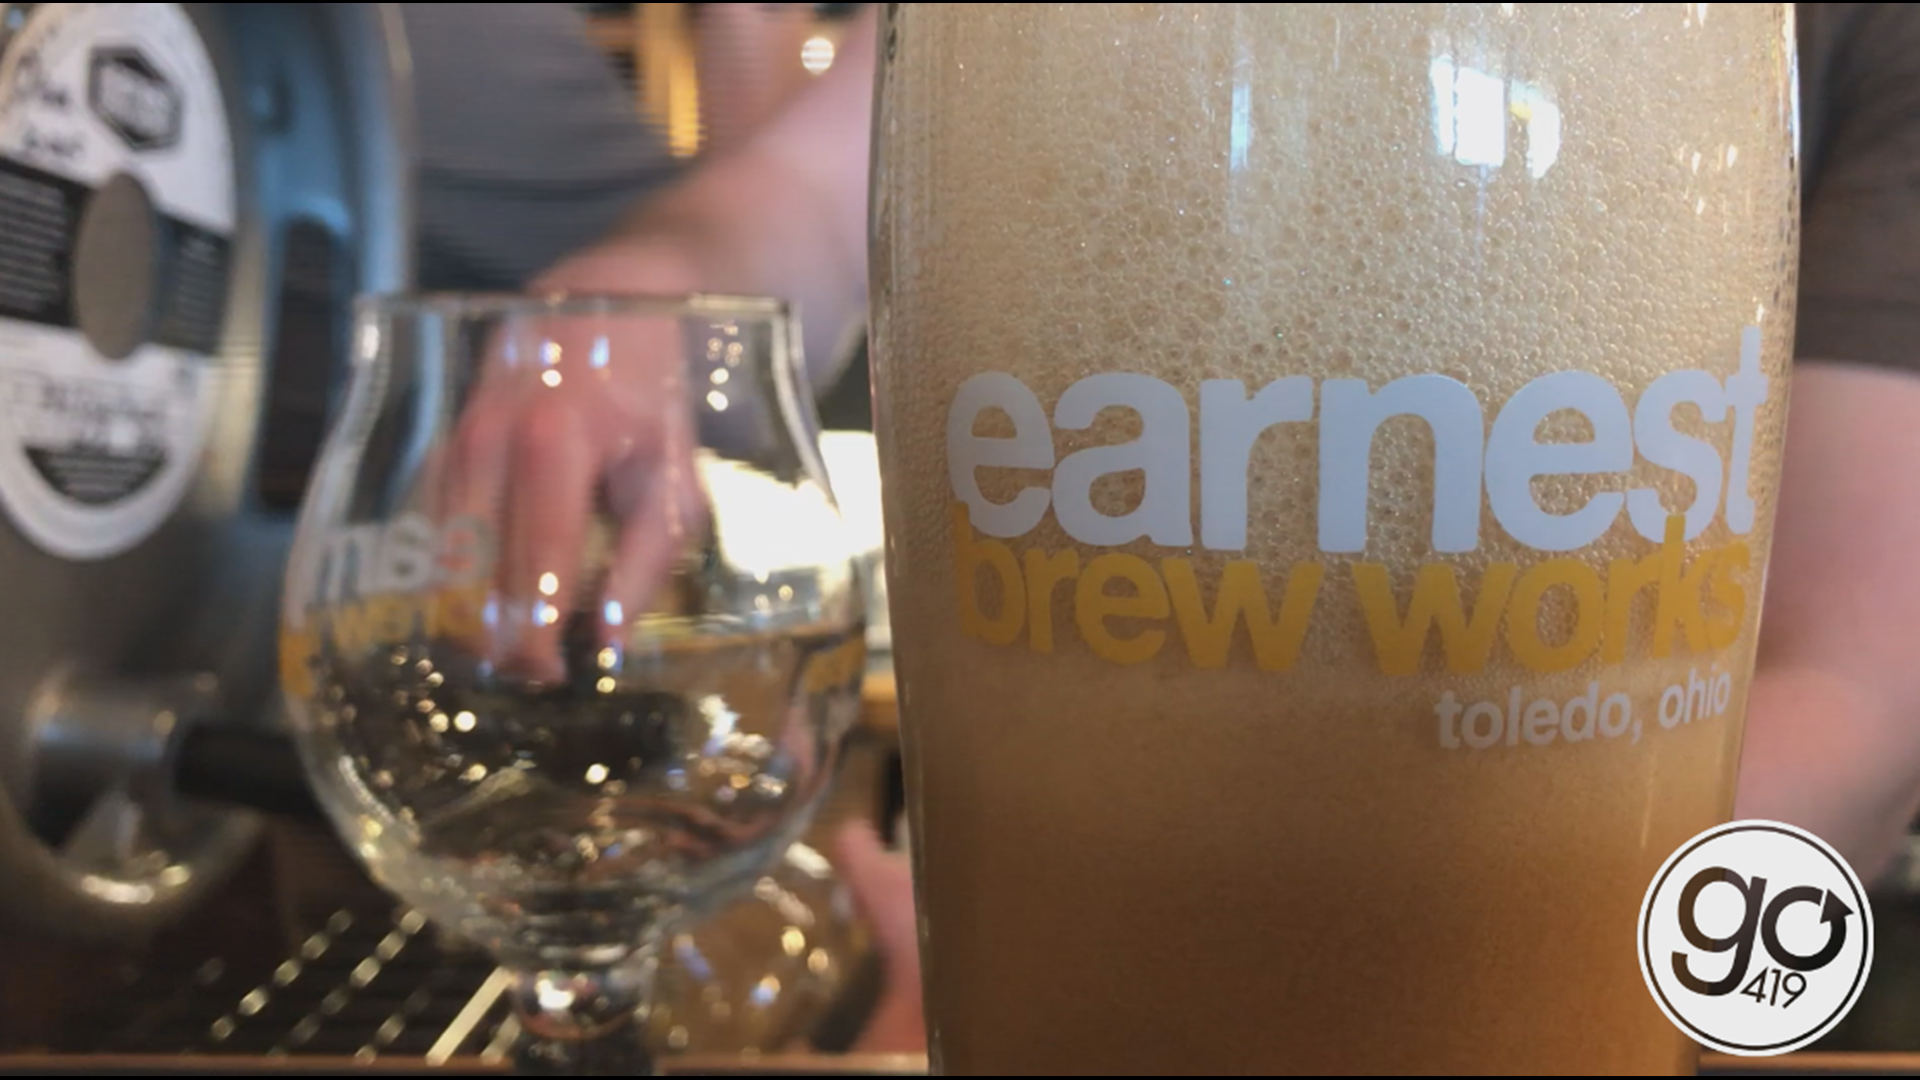 From specialty beers, to food trucks and even a dance class, the week is full of fun for the folks at Earnest Brew Works